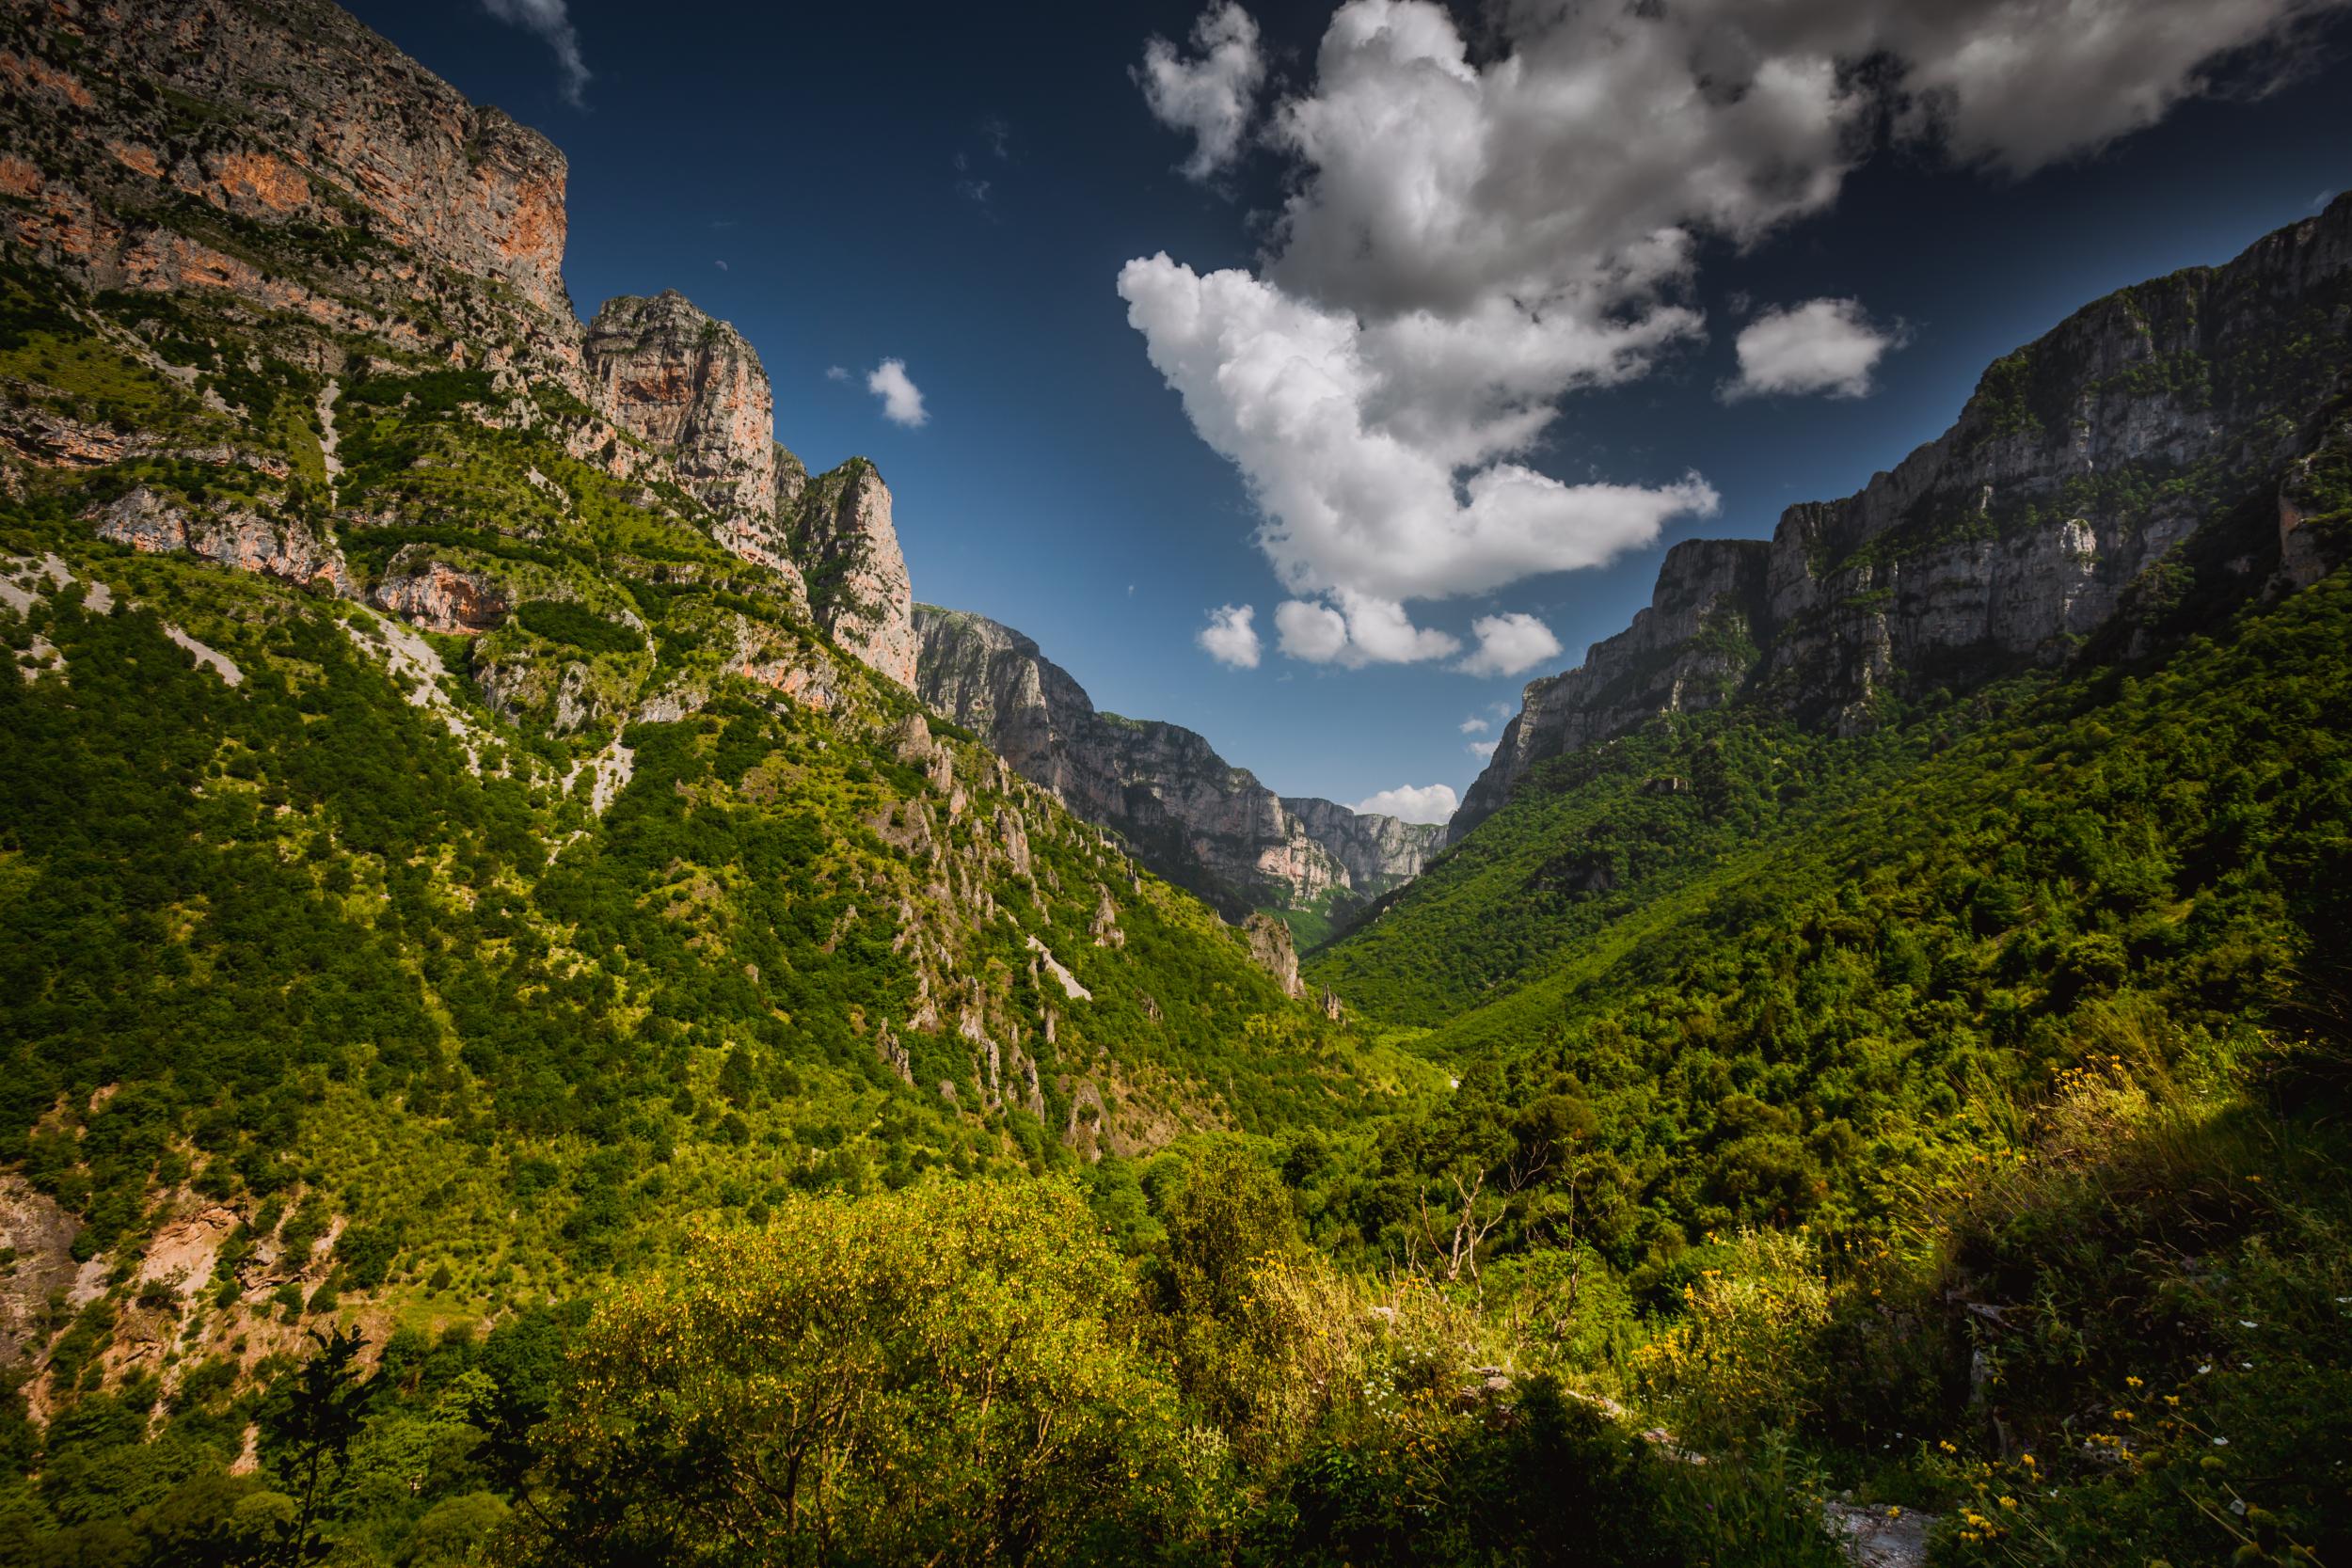 Greece's Zagori is home to green gorges and mountains